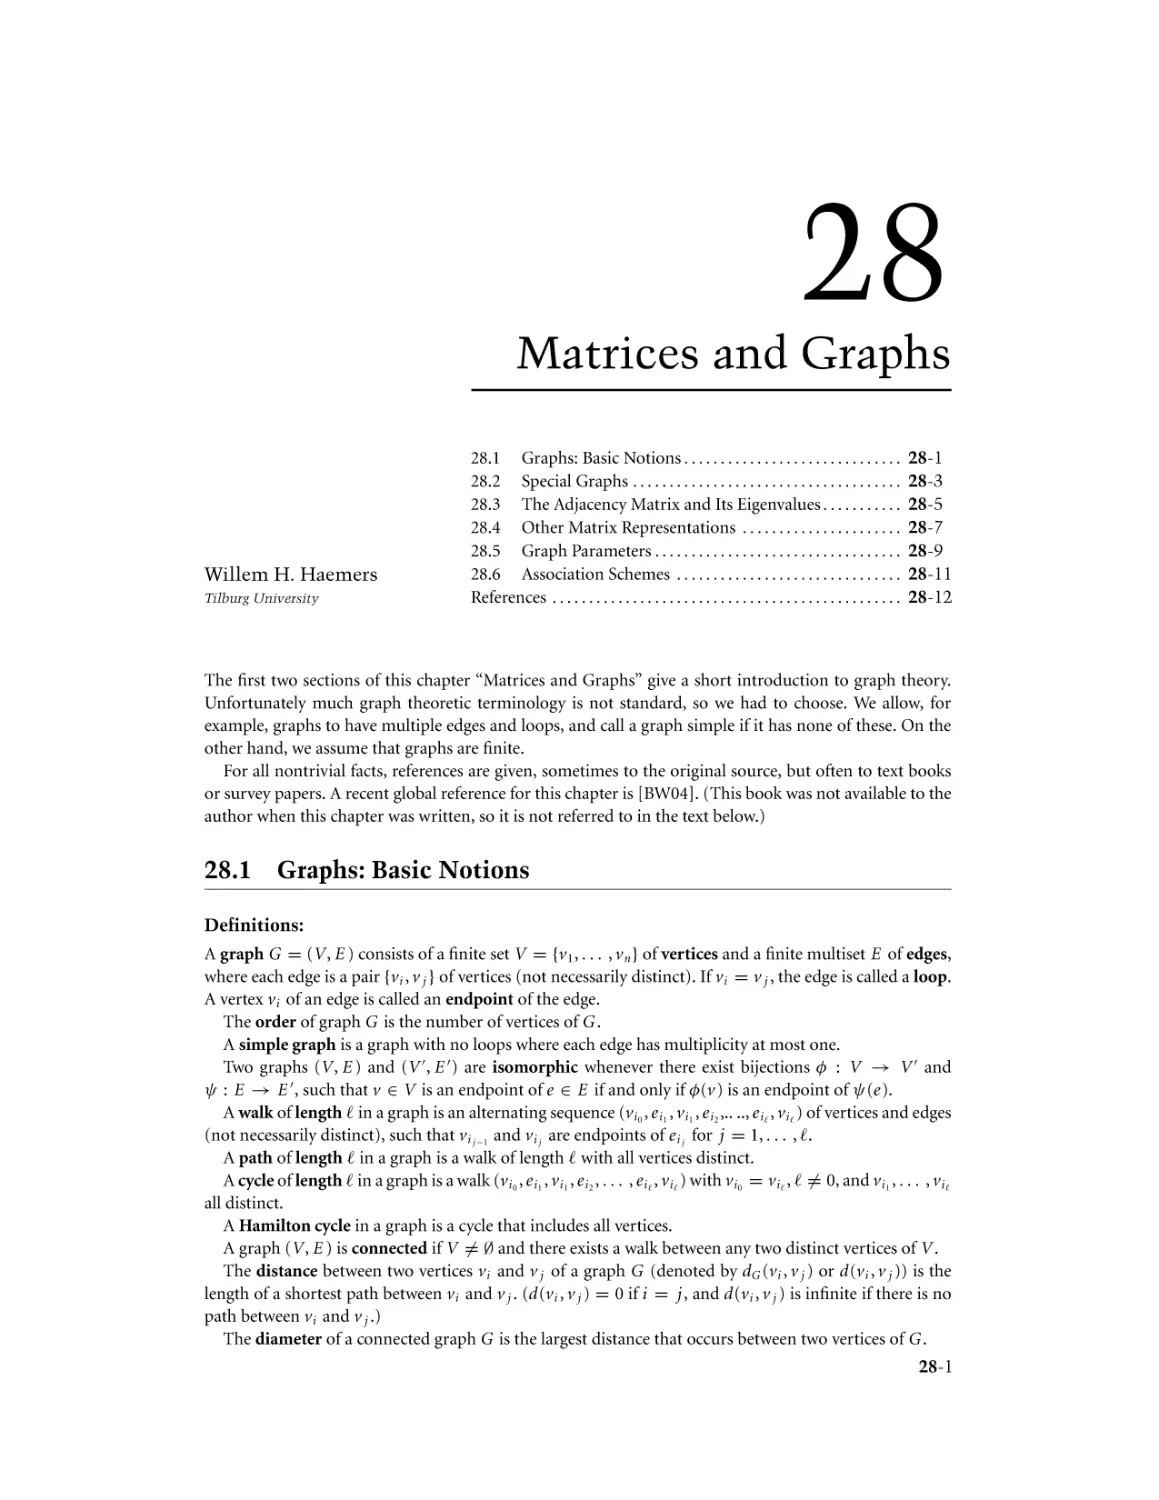 Chapter 28. Matrices and Graphs